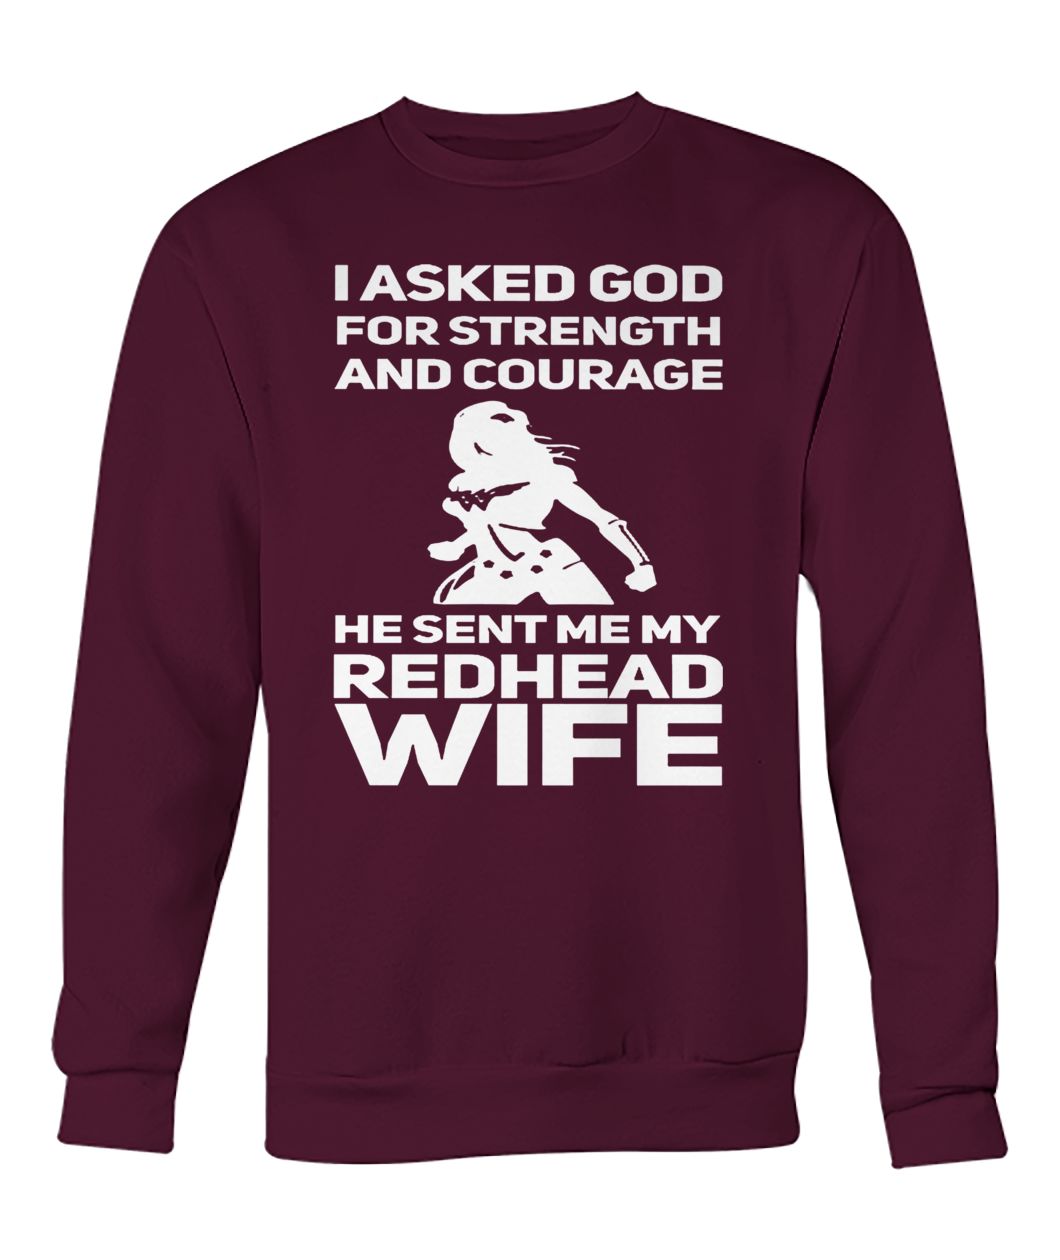 I asked god for strength and courage he sent my redhead wife crew neck sweatshirt